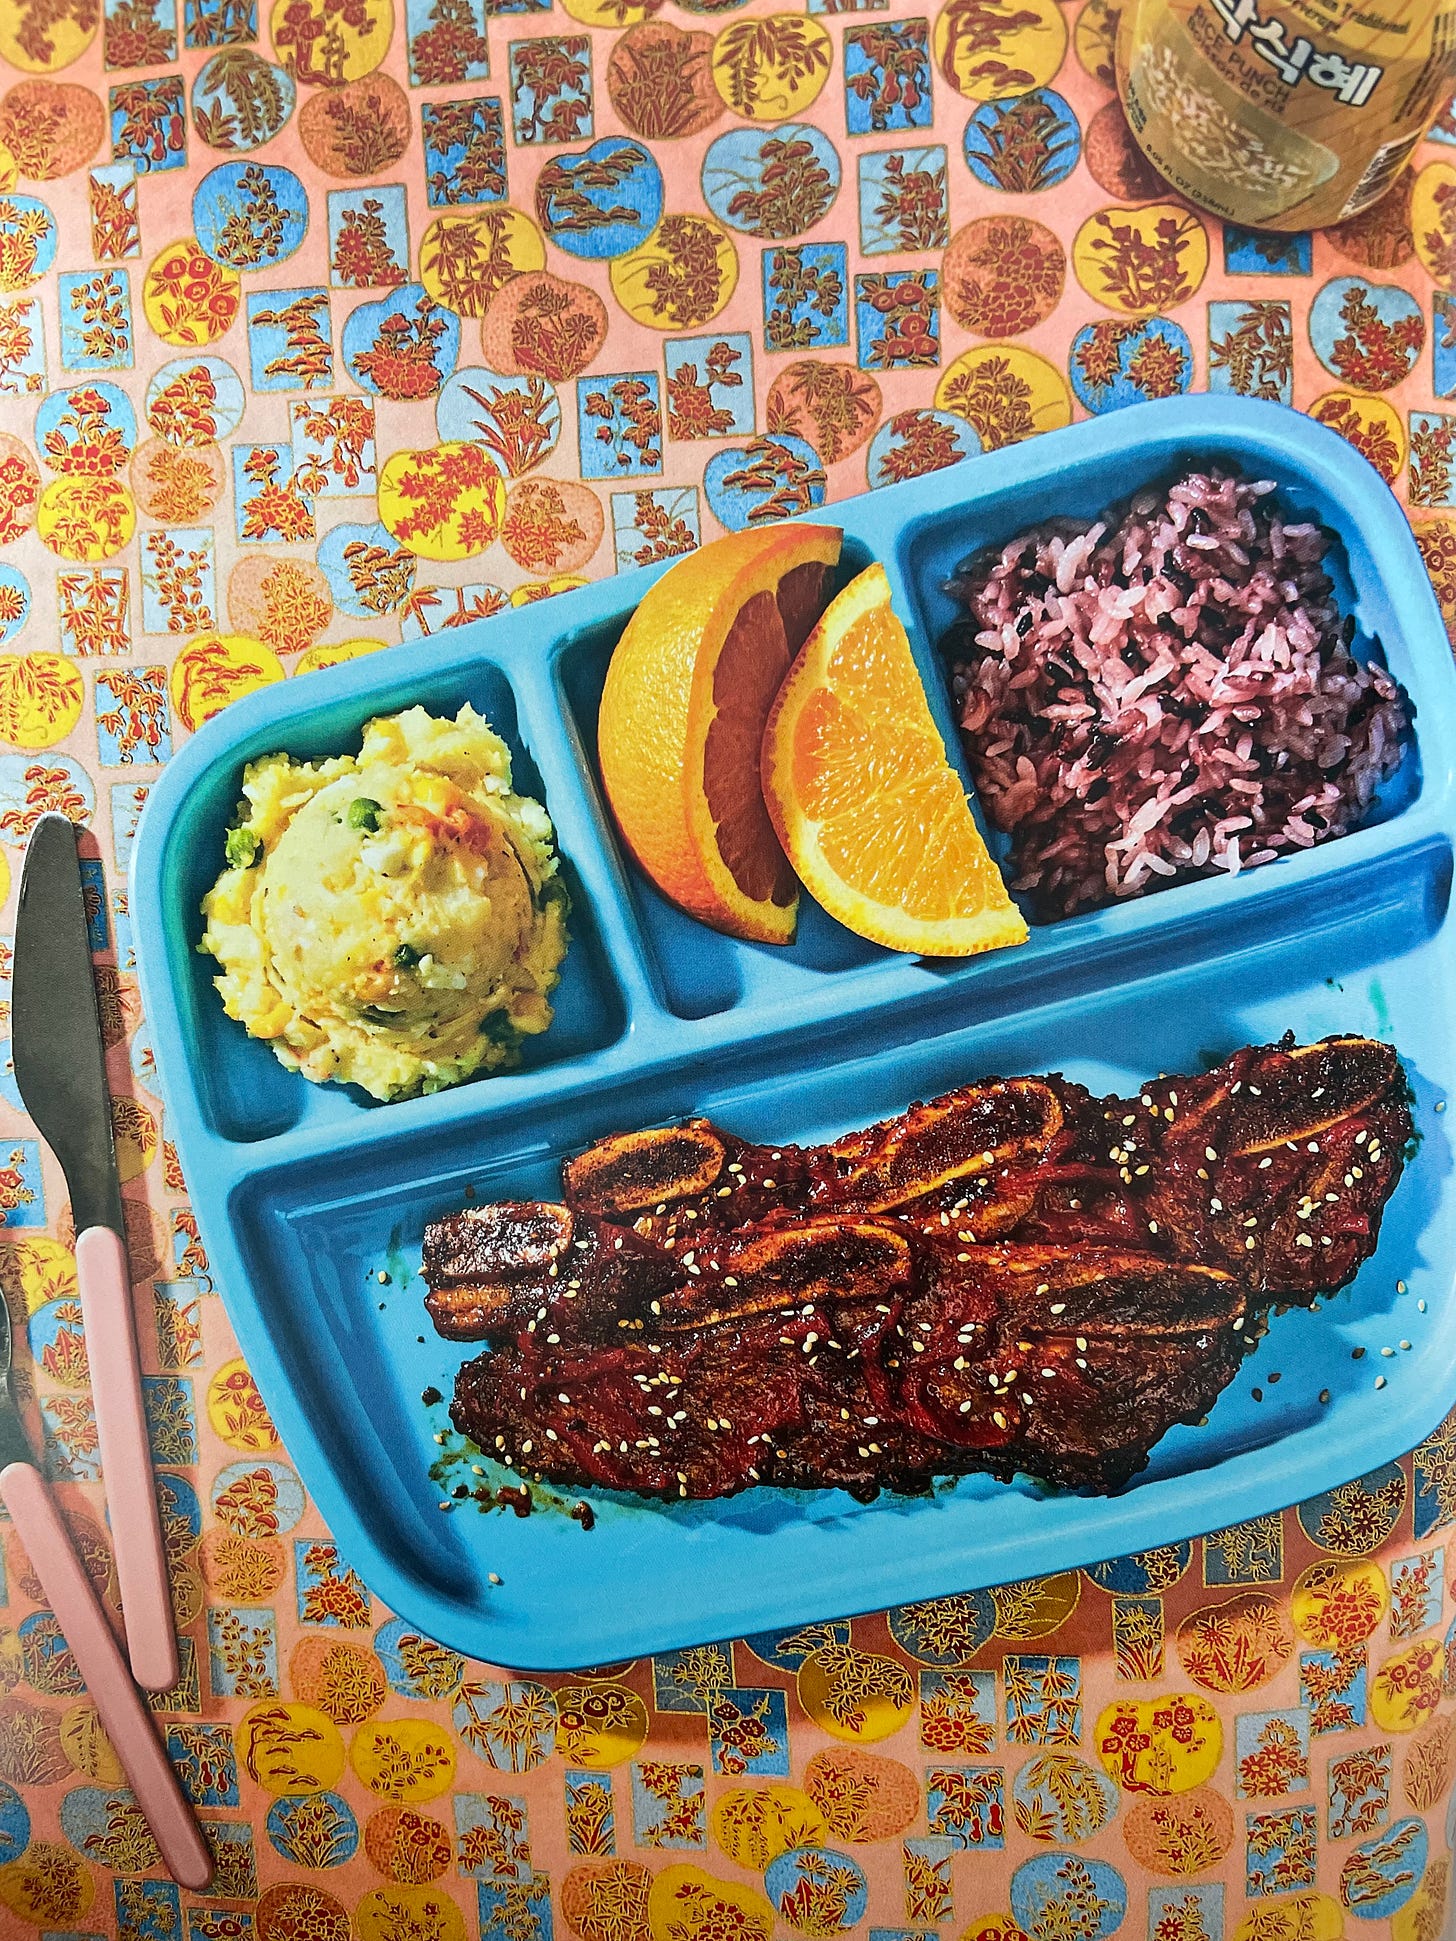 LA style kalbi on a school lunch tray with a scoop of potato salad, orange slices, and rice